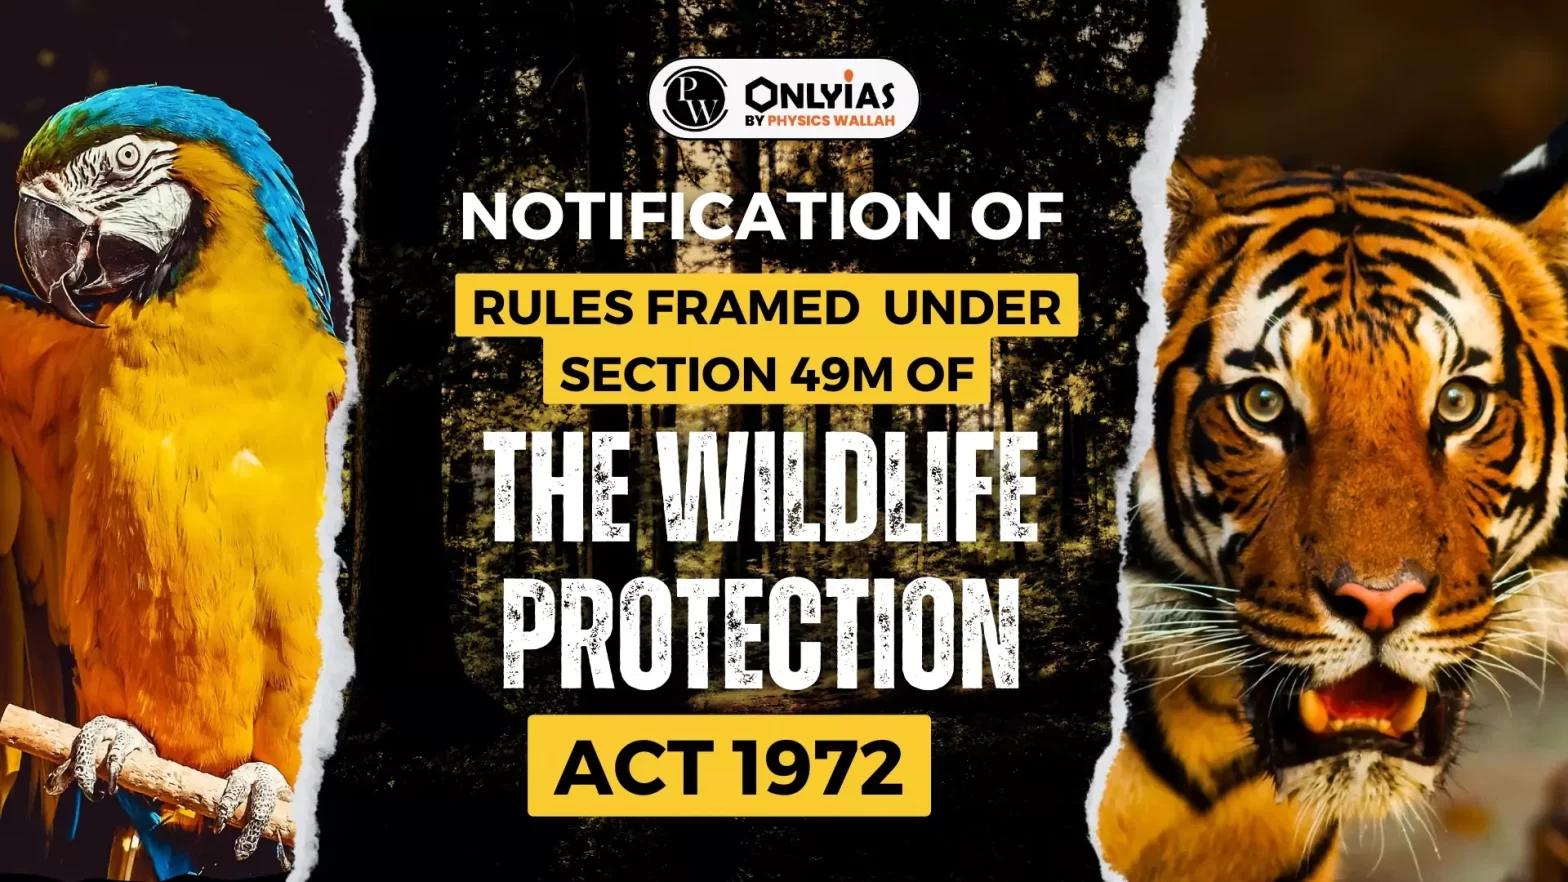 Notification of Rules Framed Under Section 49M of the Wildlife Protection Act 1972